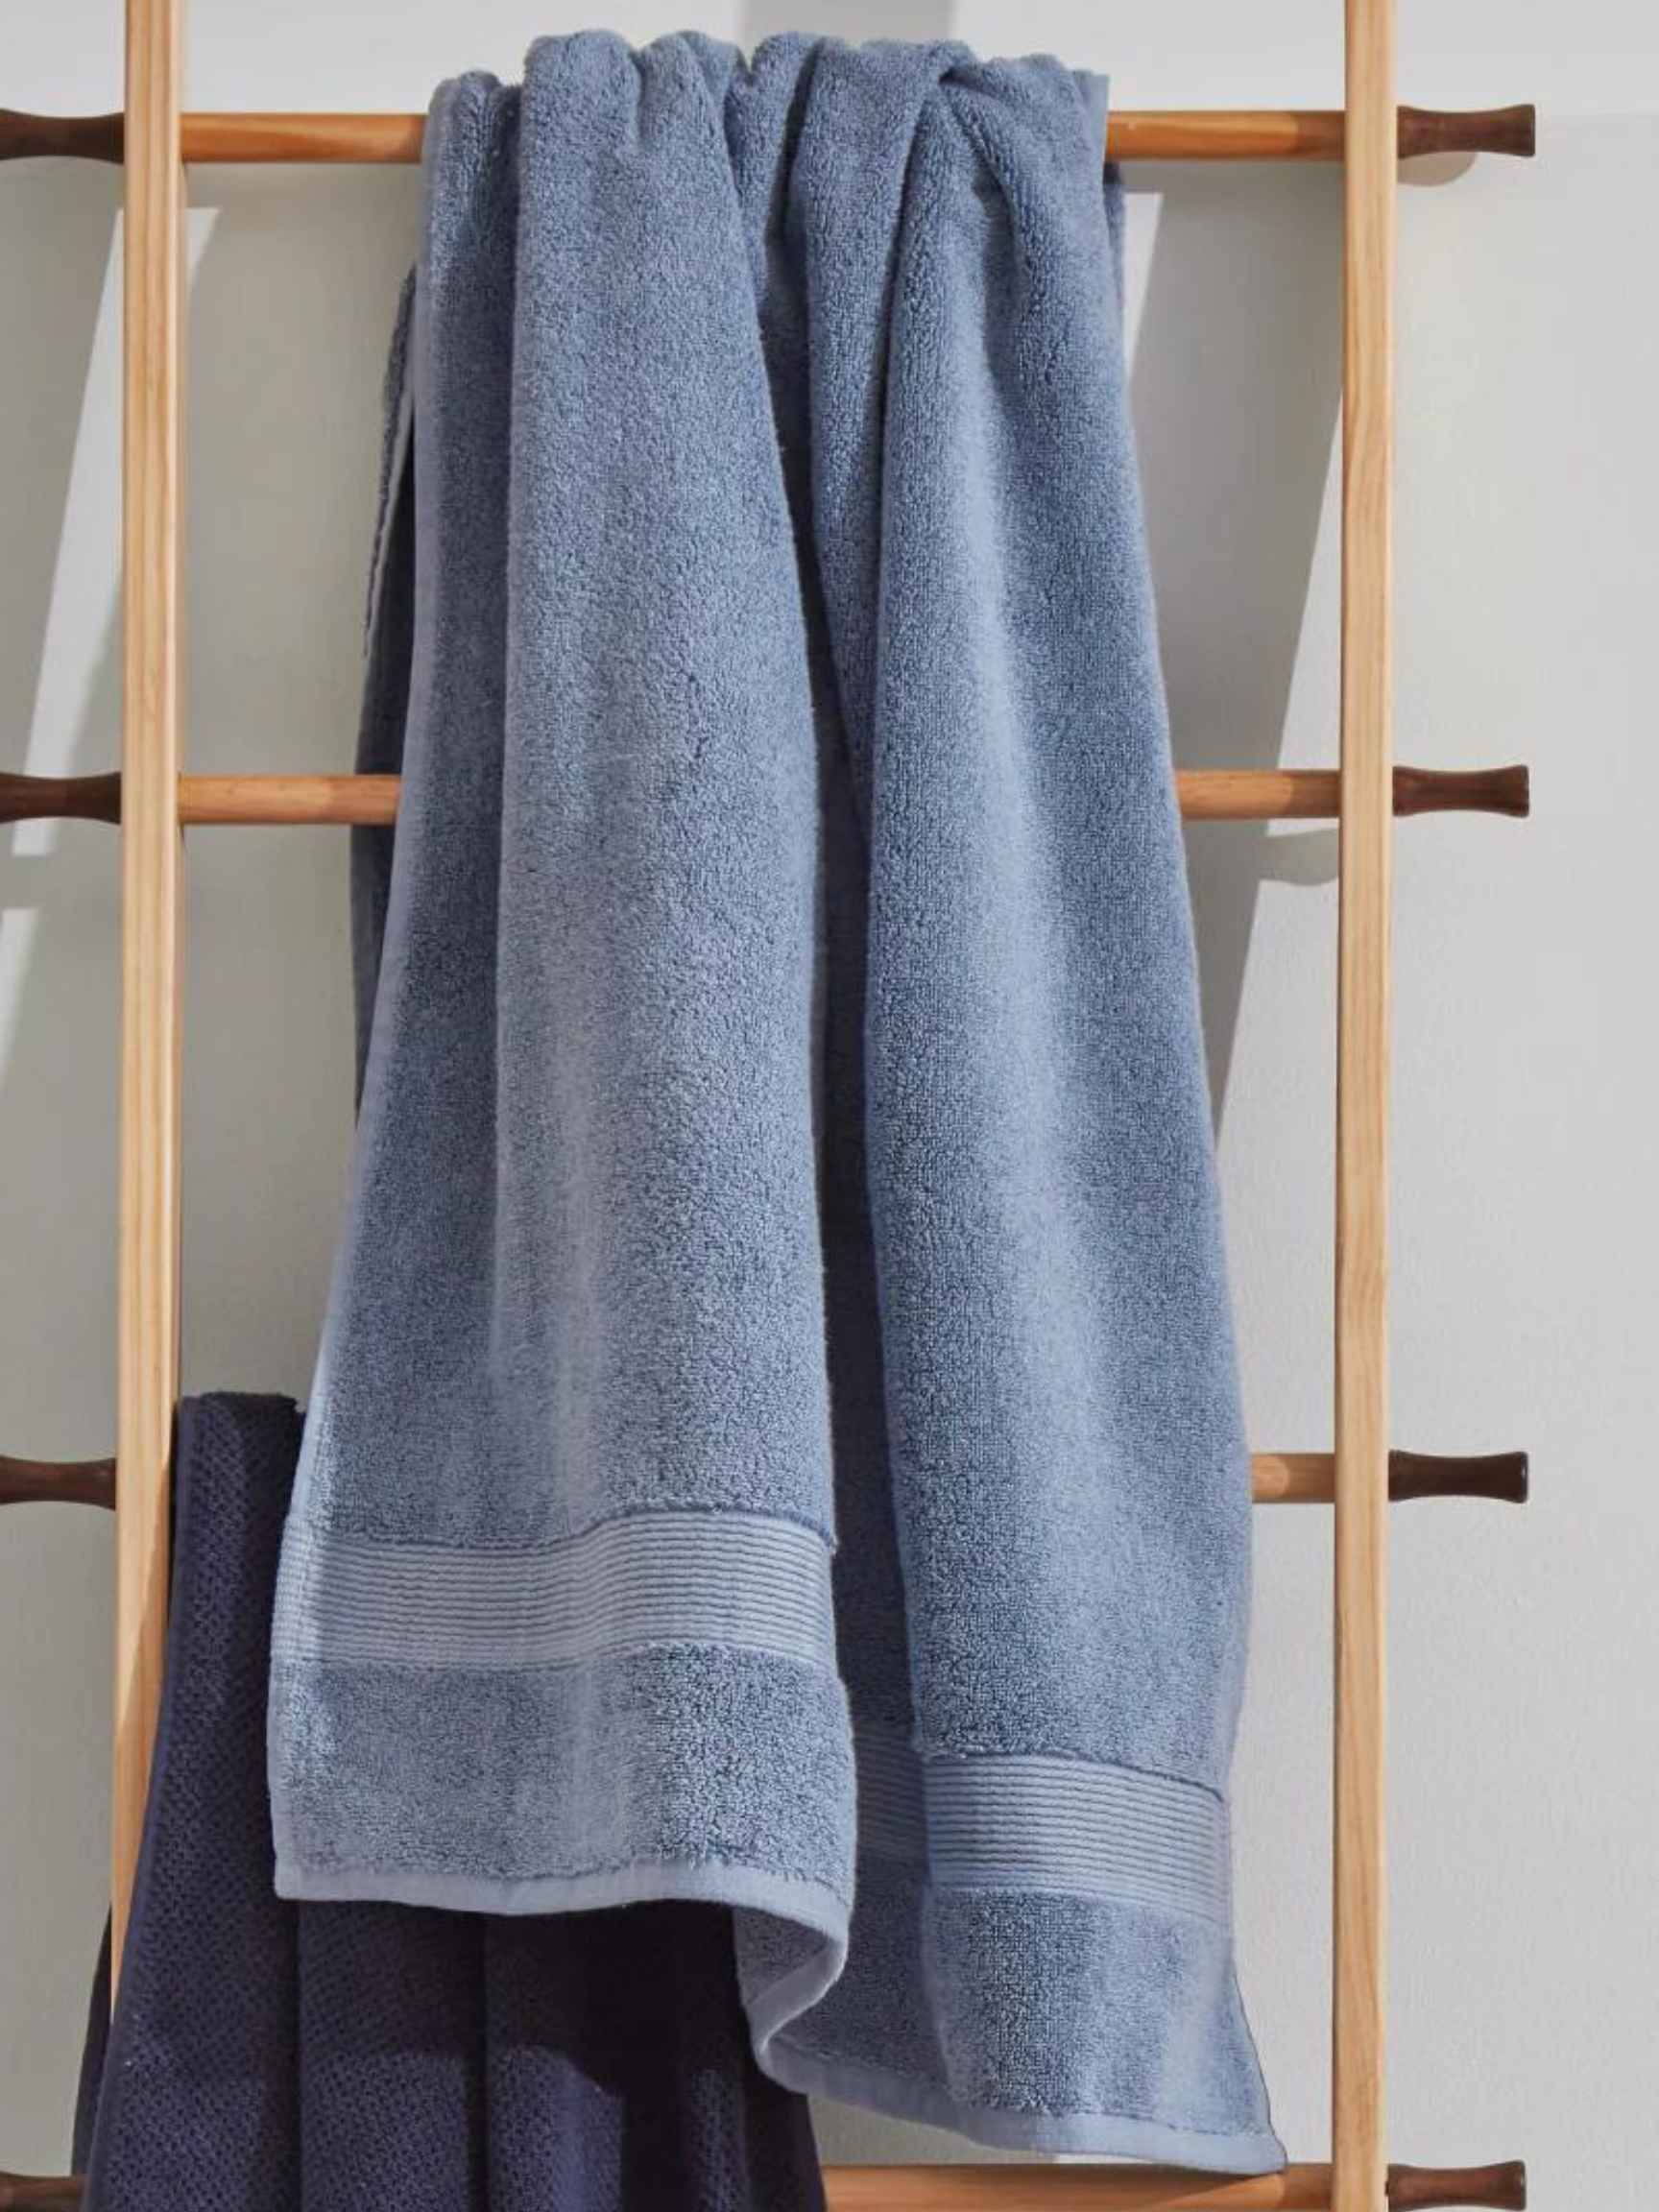 To have Earth Friendly Weddings considers adding these stunning chambray towels to your wedding registry